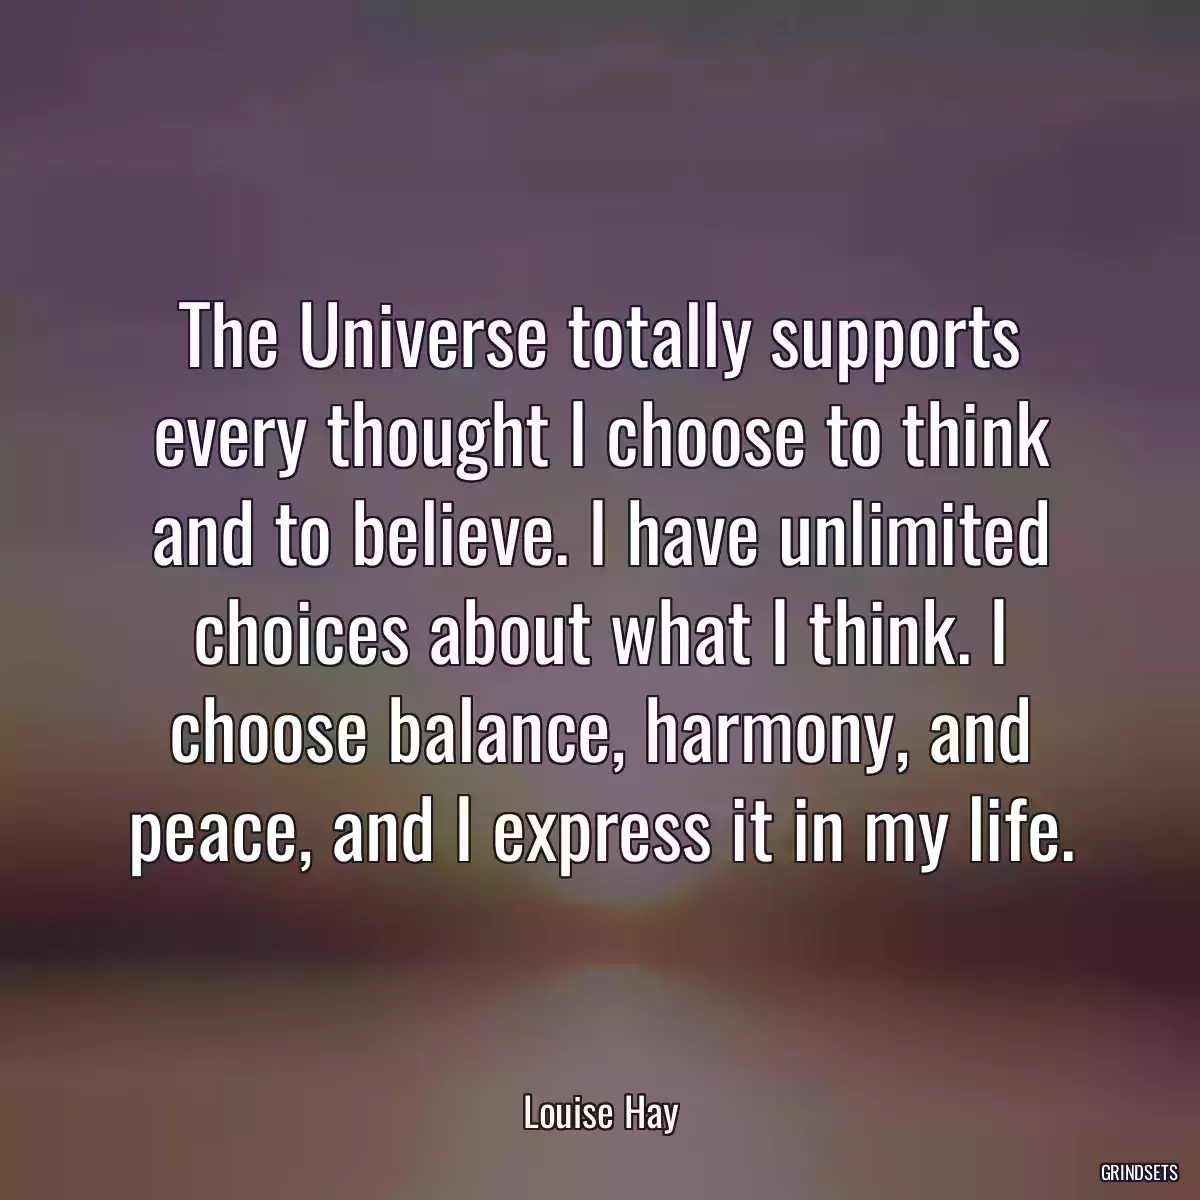 The Universe totally supports every thought I choose to think and to believe. I have unlimited choices about what I think. I choose balance, harmony, and peace, and I express it in my life.